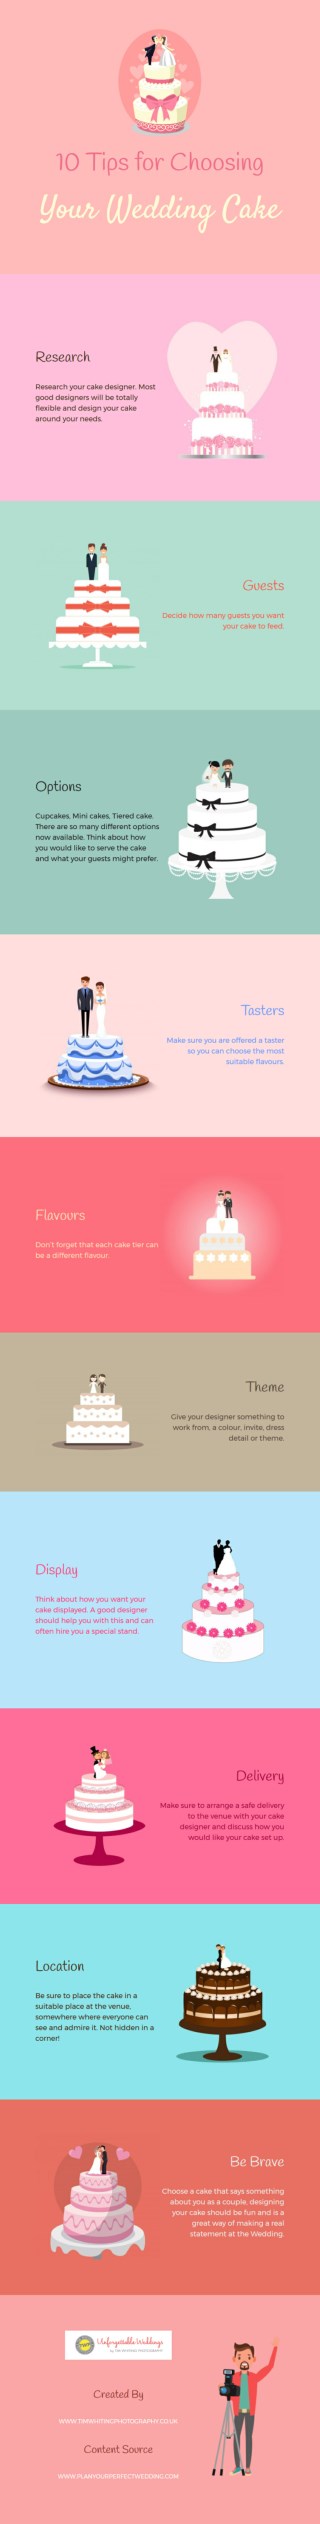 10 Tips for Choosing Your Wedding Cake